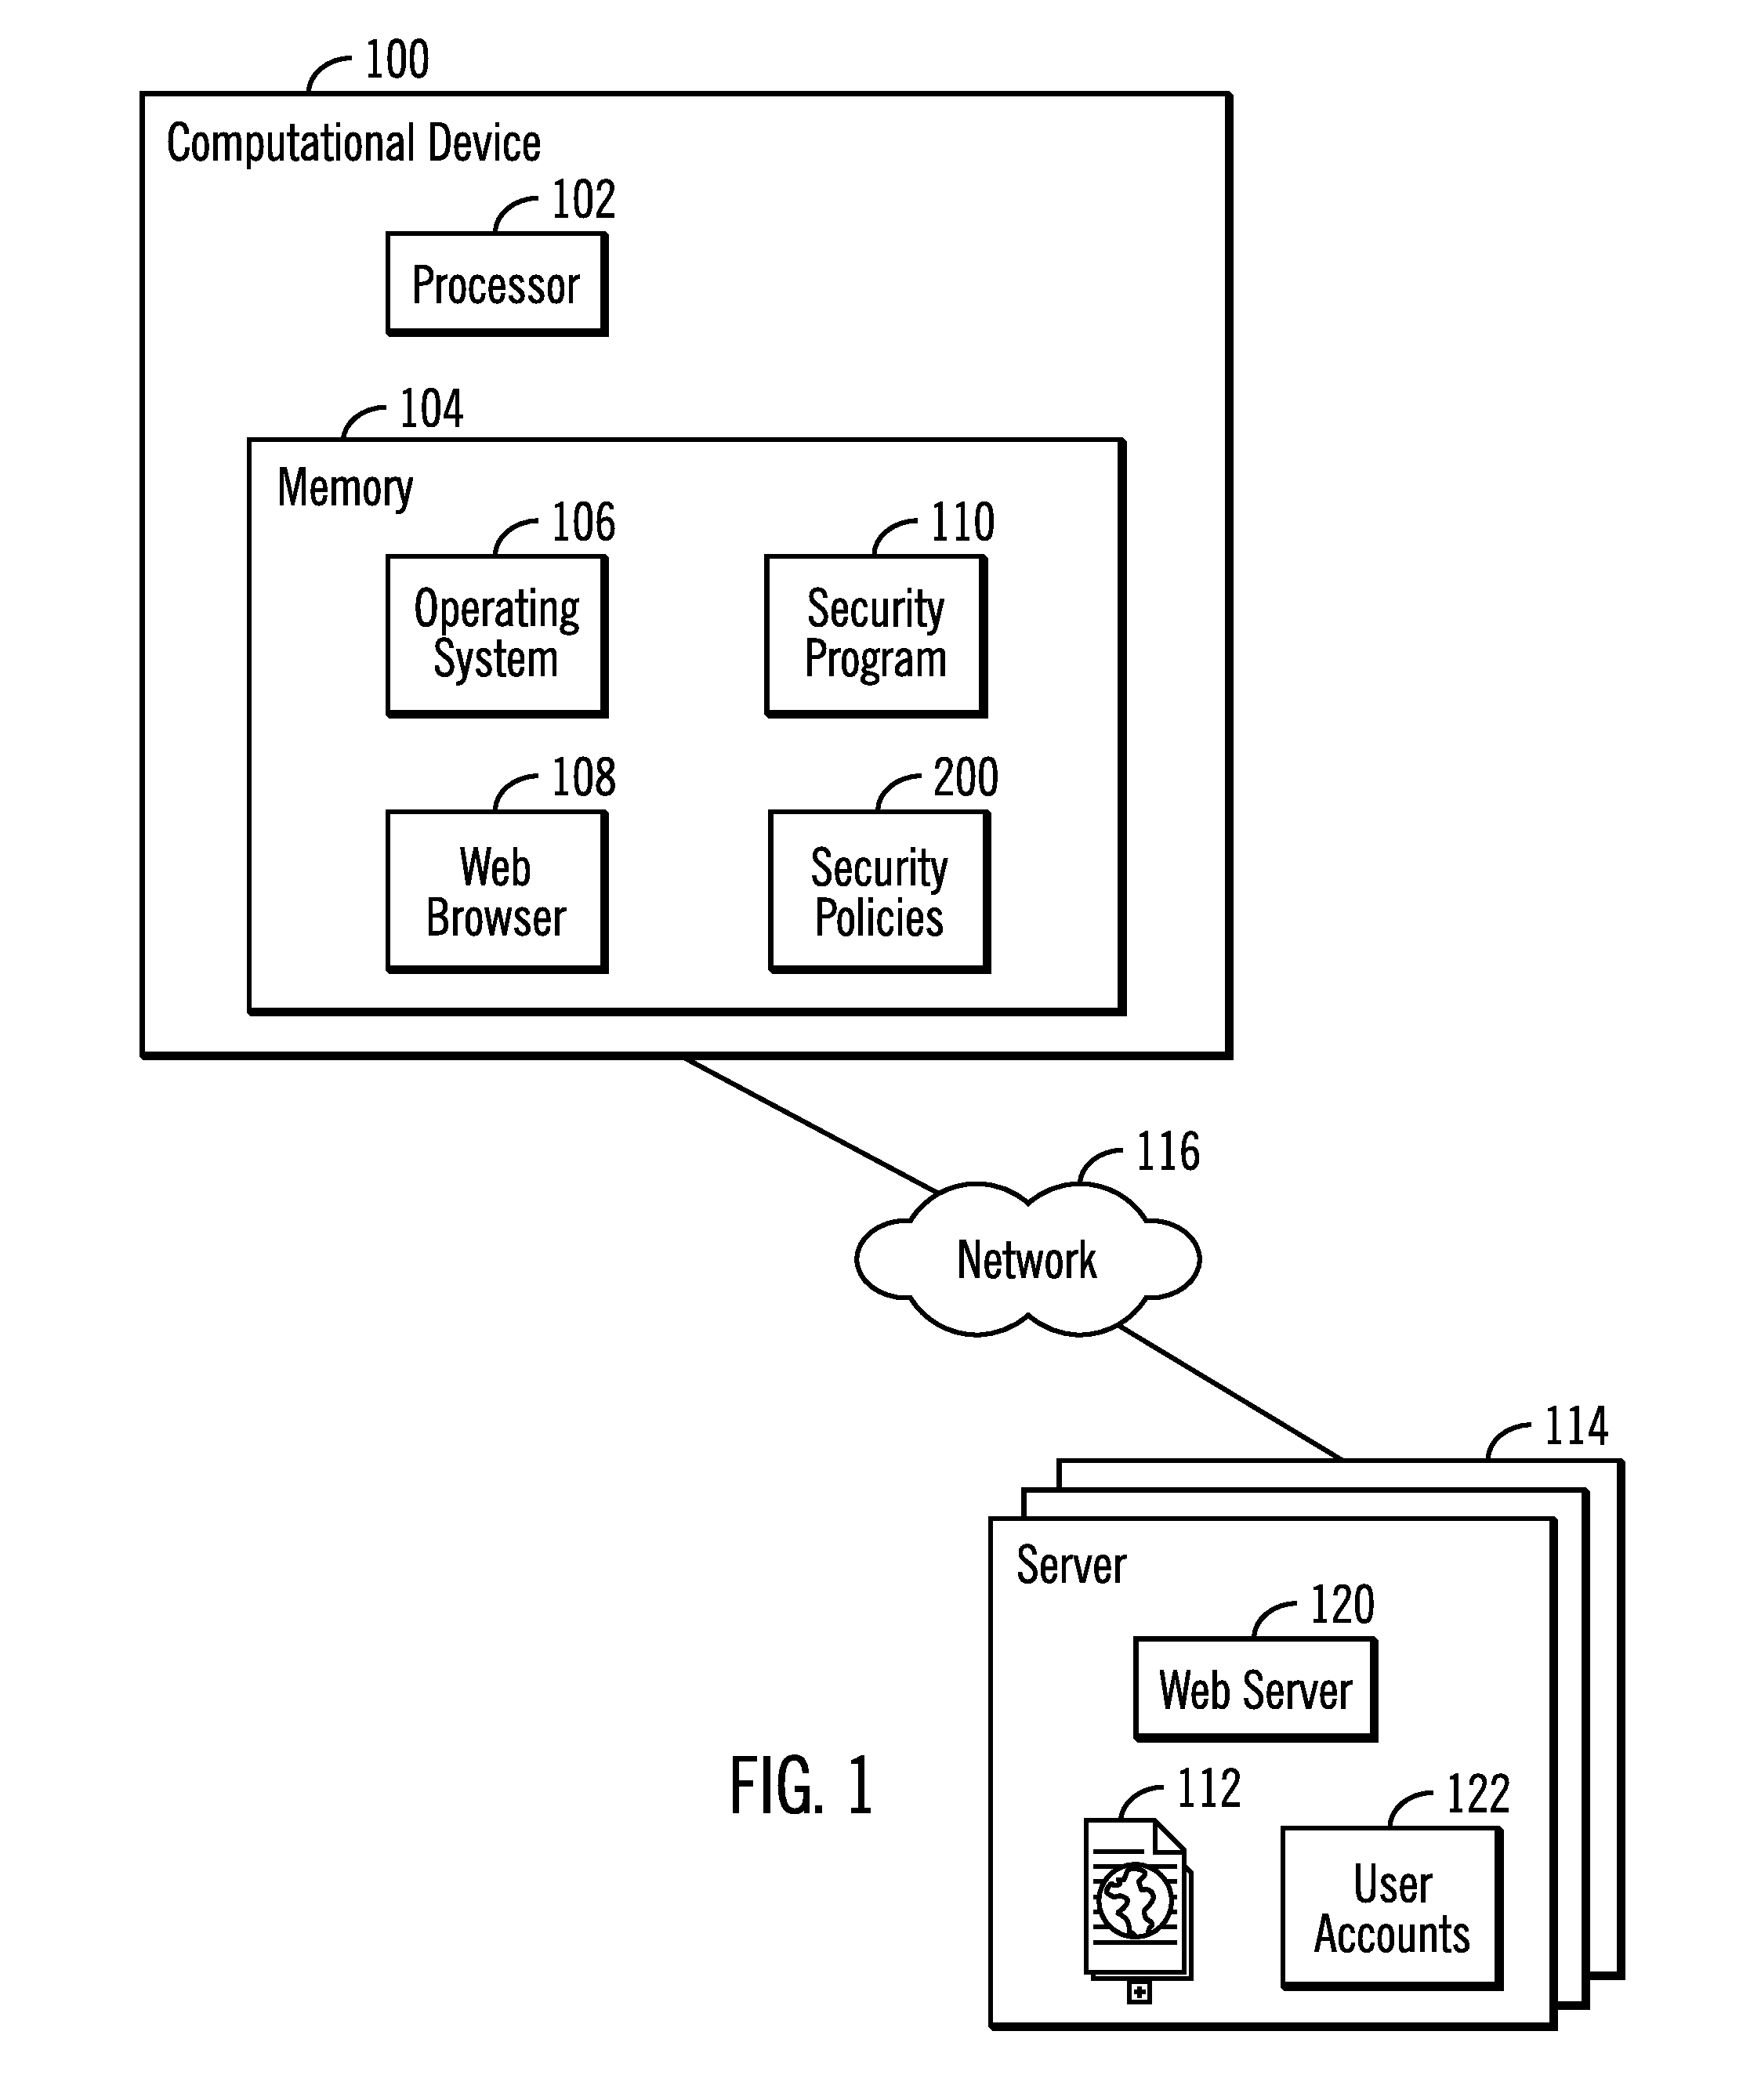 Interacting with a remote server over a network to determine whether to allow data exchange with a resource at the remote server